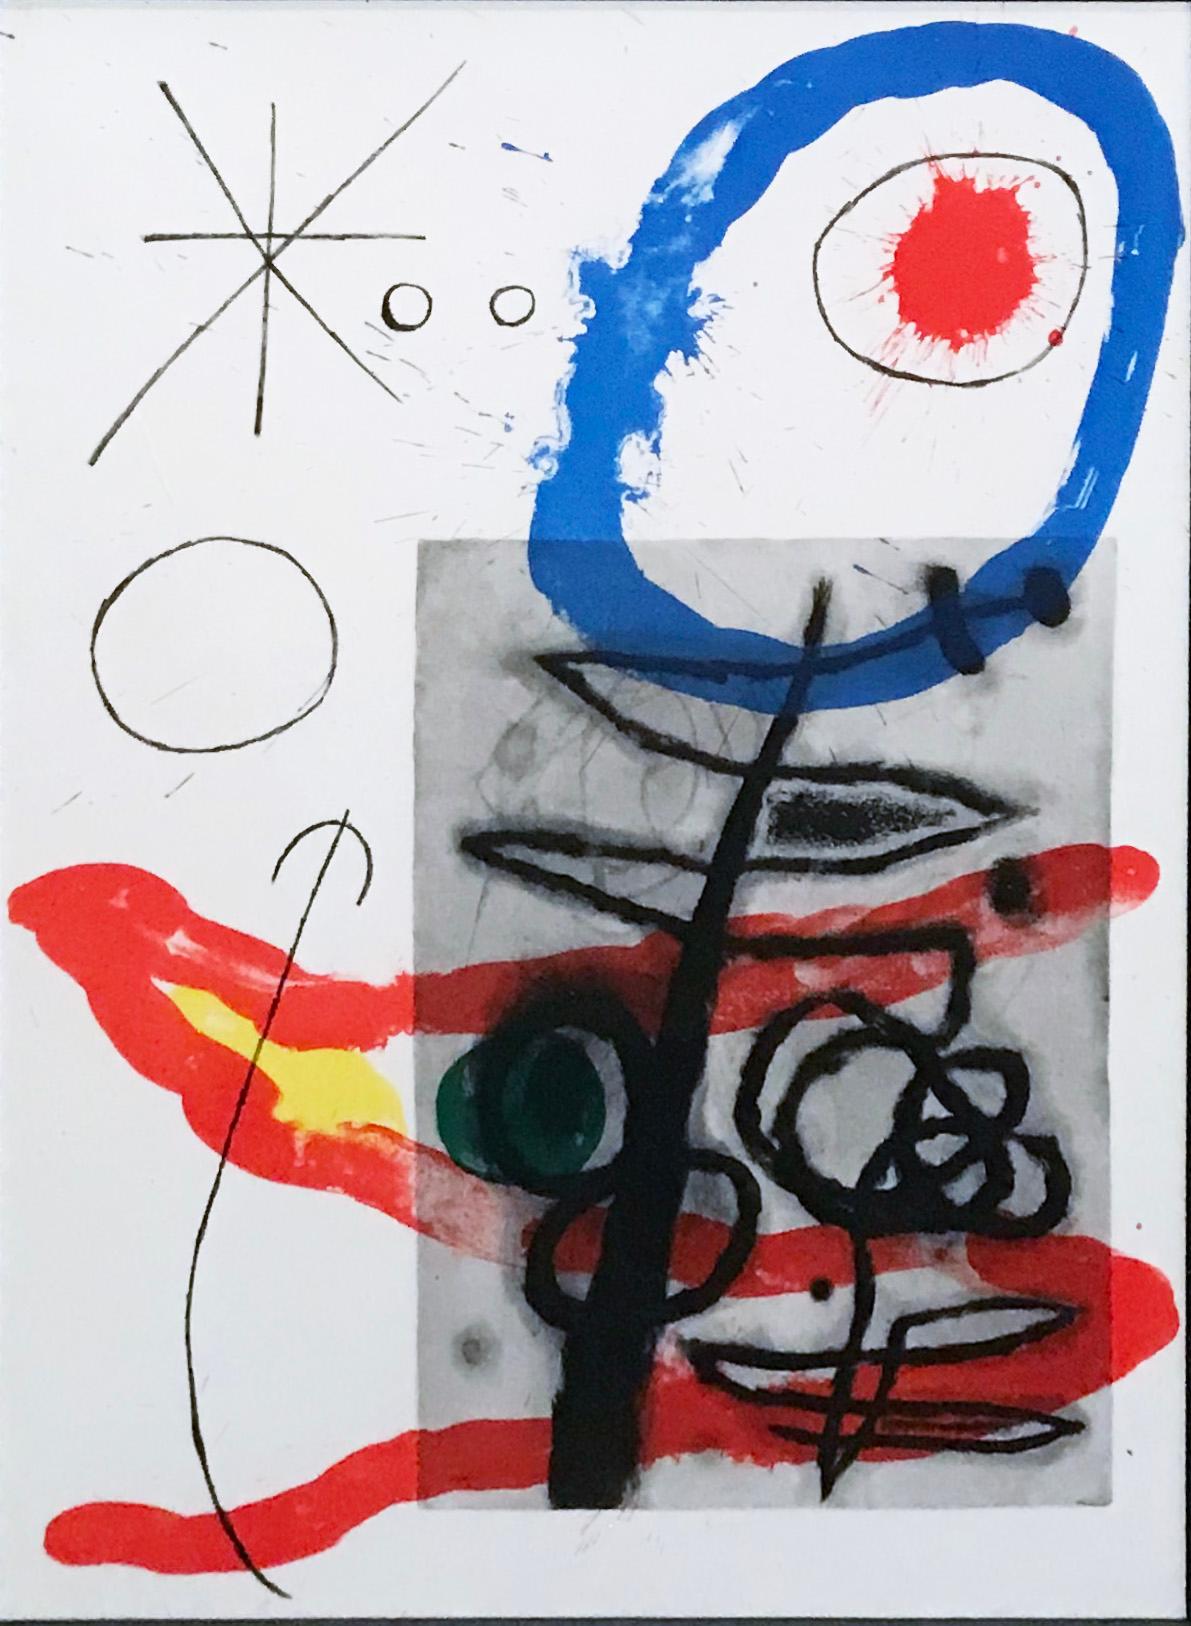 Joan Miró Abstract Print - Plate 16, from 1965 Peintures sur Cartons